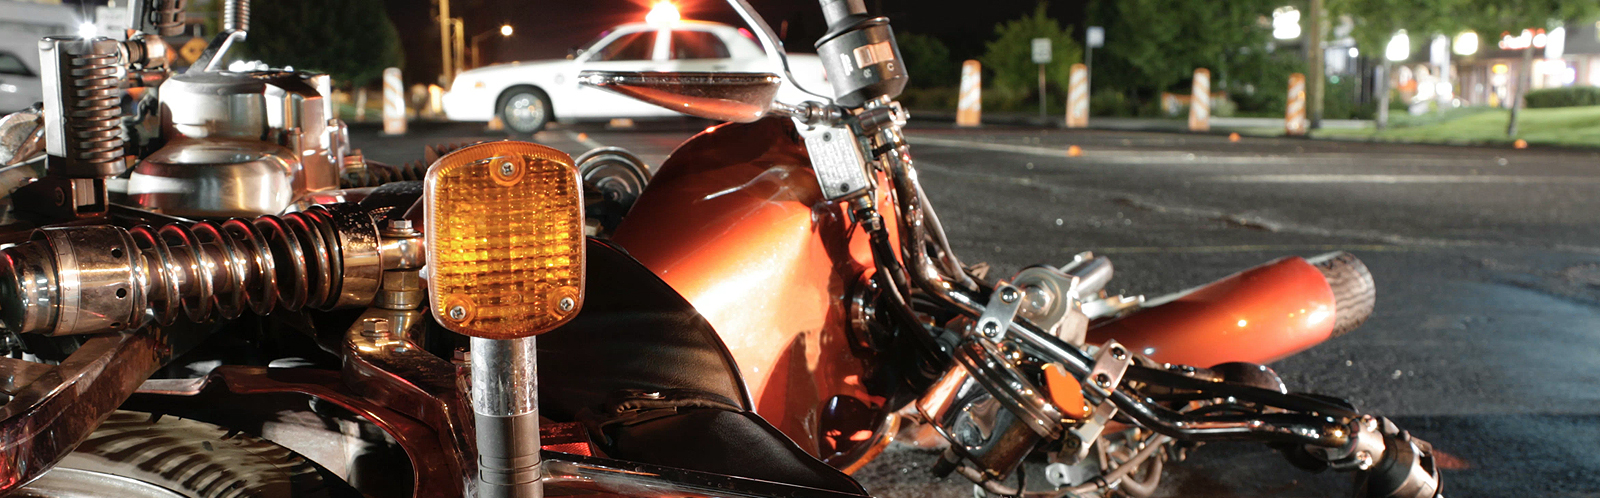 Motorcycle lies broken on the road at night after an accident.